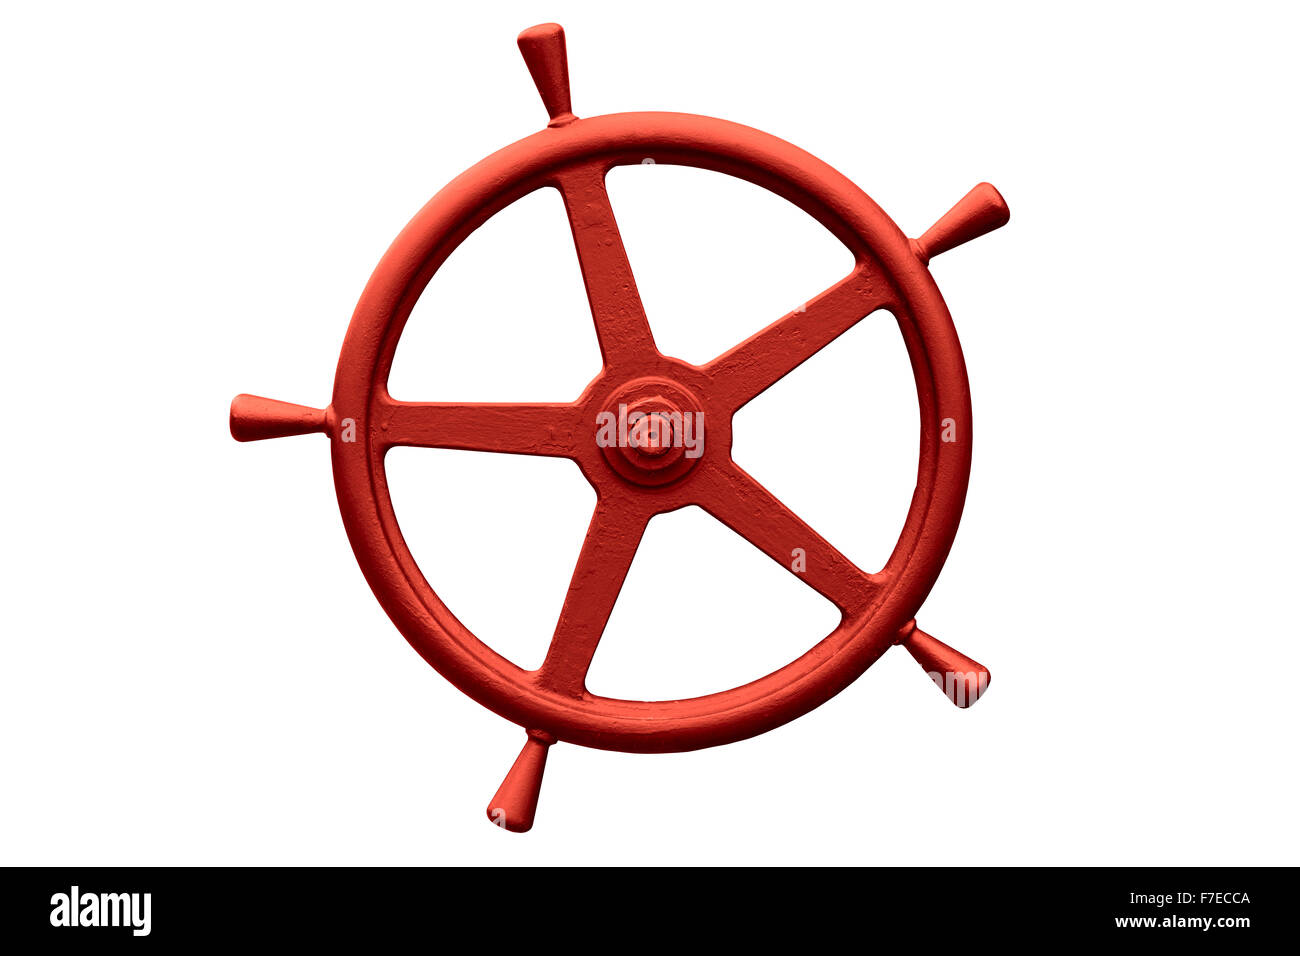 red metal steering wheel isolated on white background Stock Photo